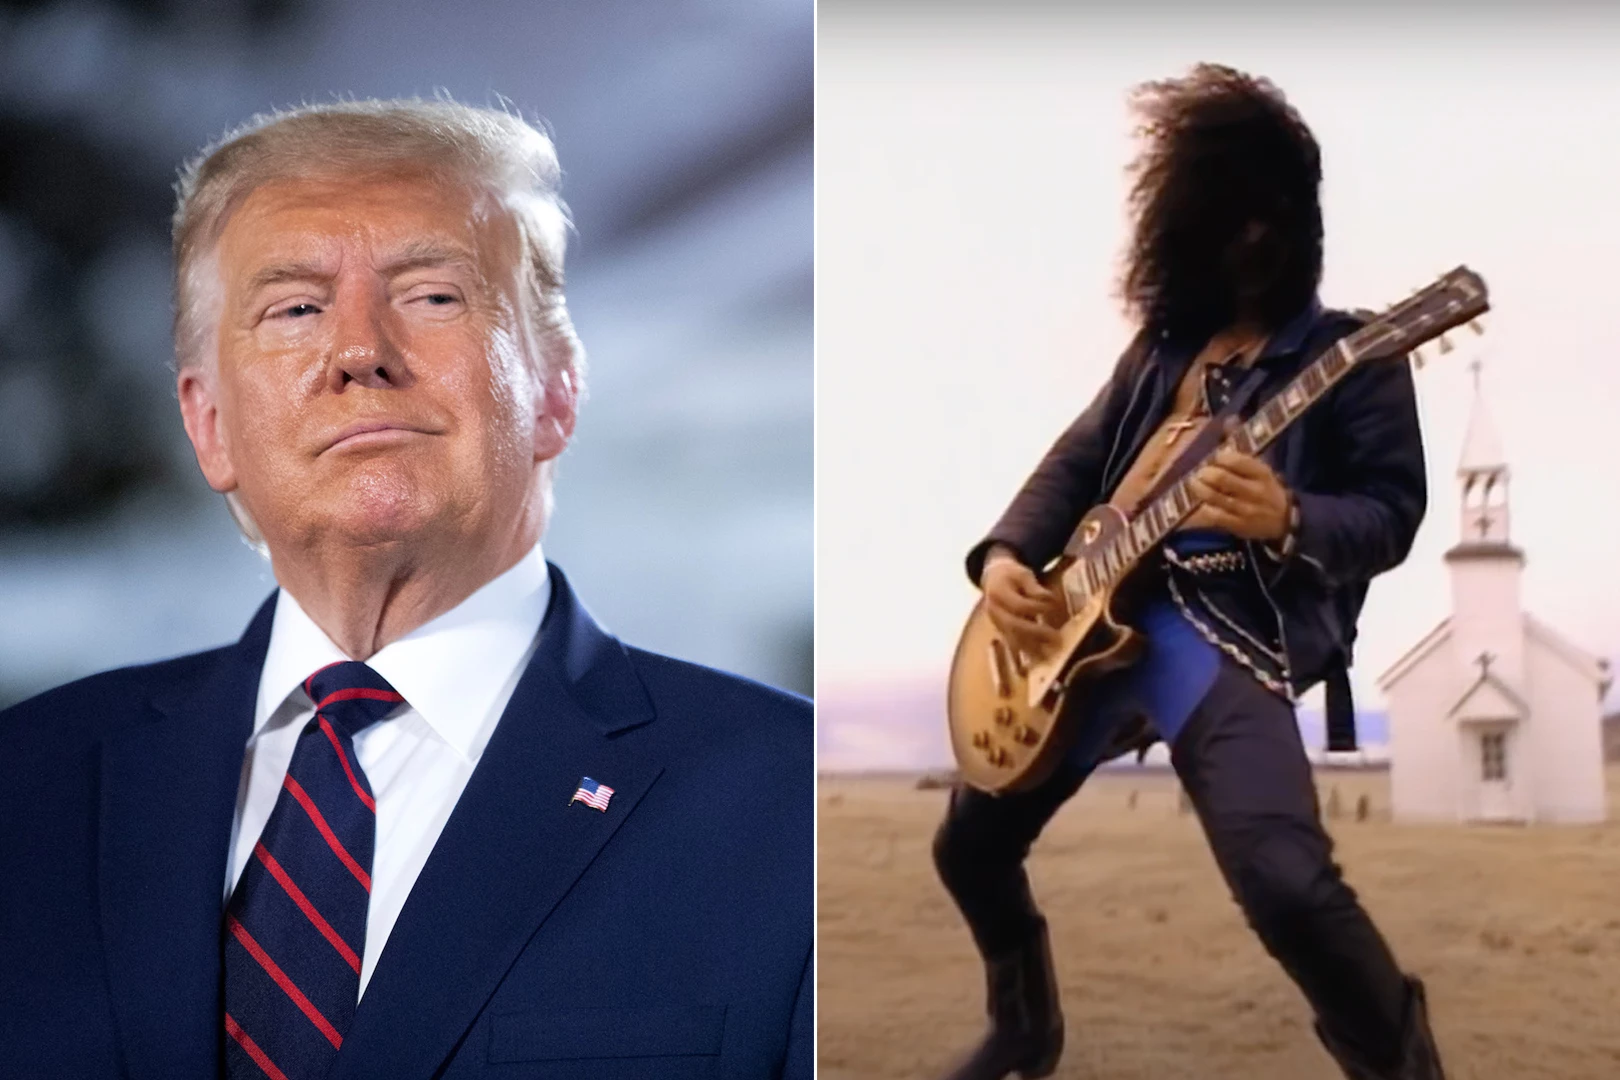 Trump: 'November Rain' Is the 'Greatest Music Video of All Time'